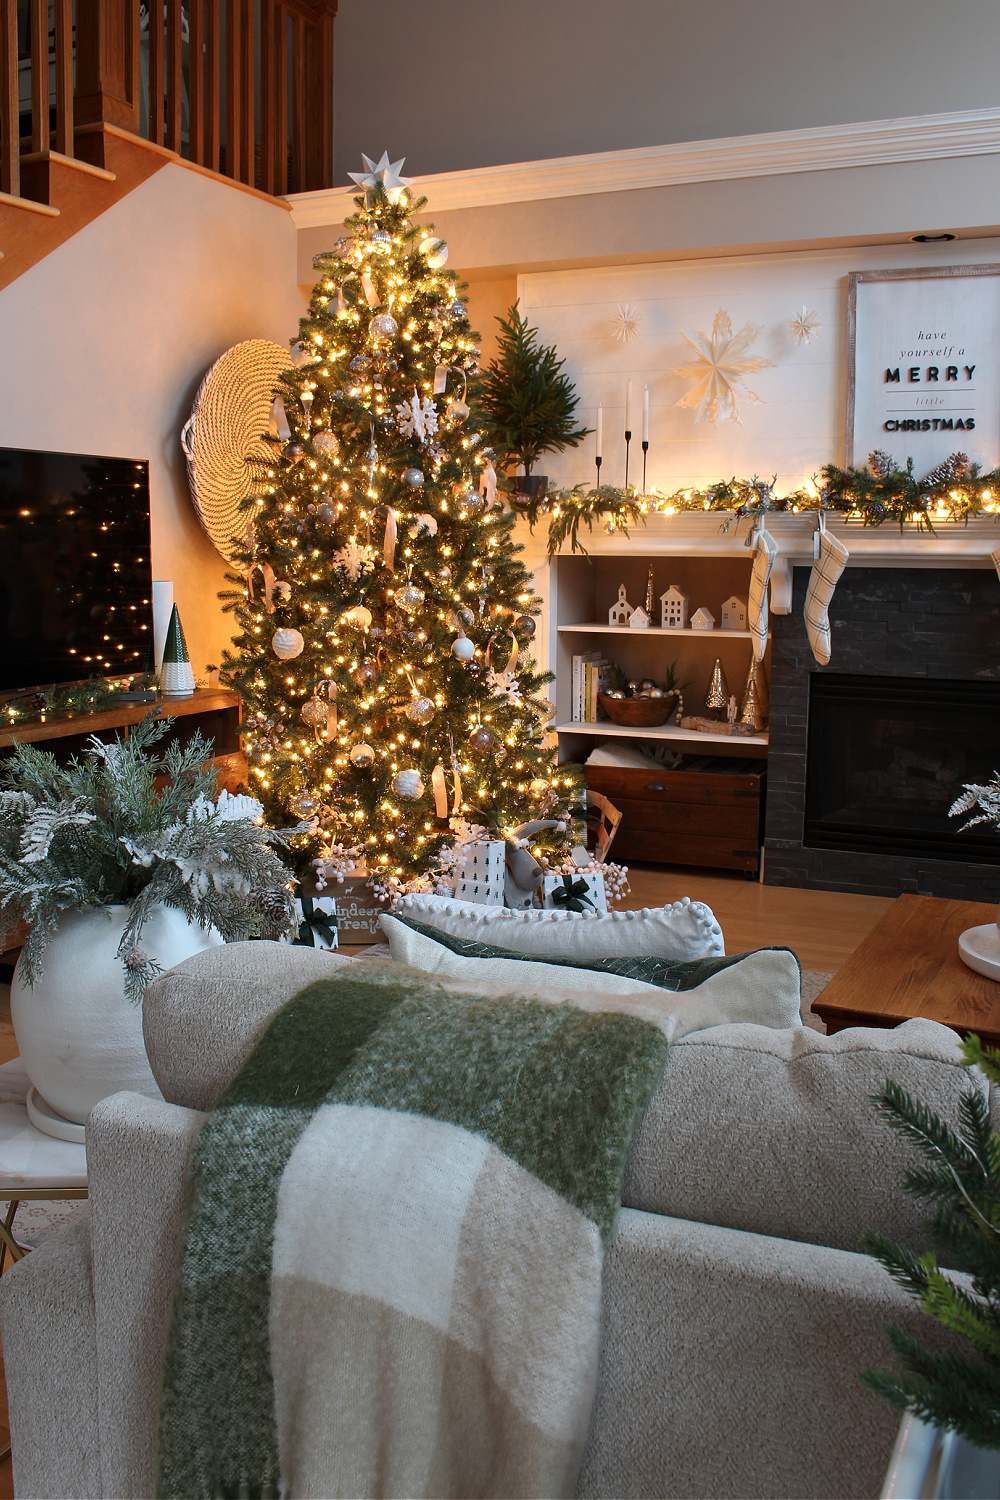 Living room decorated for Christmas in green and white.